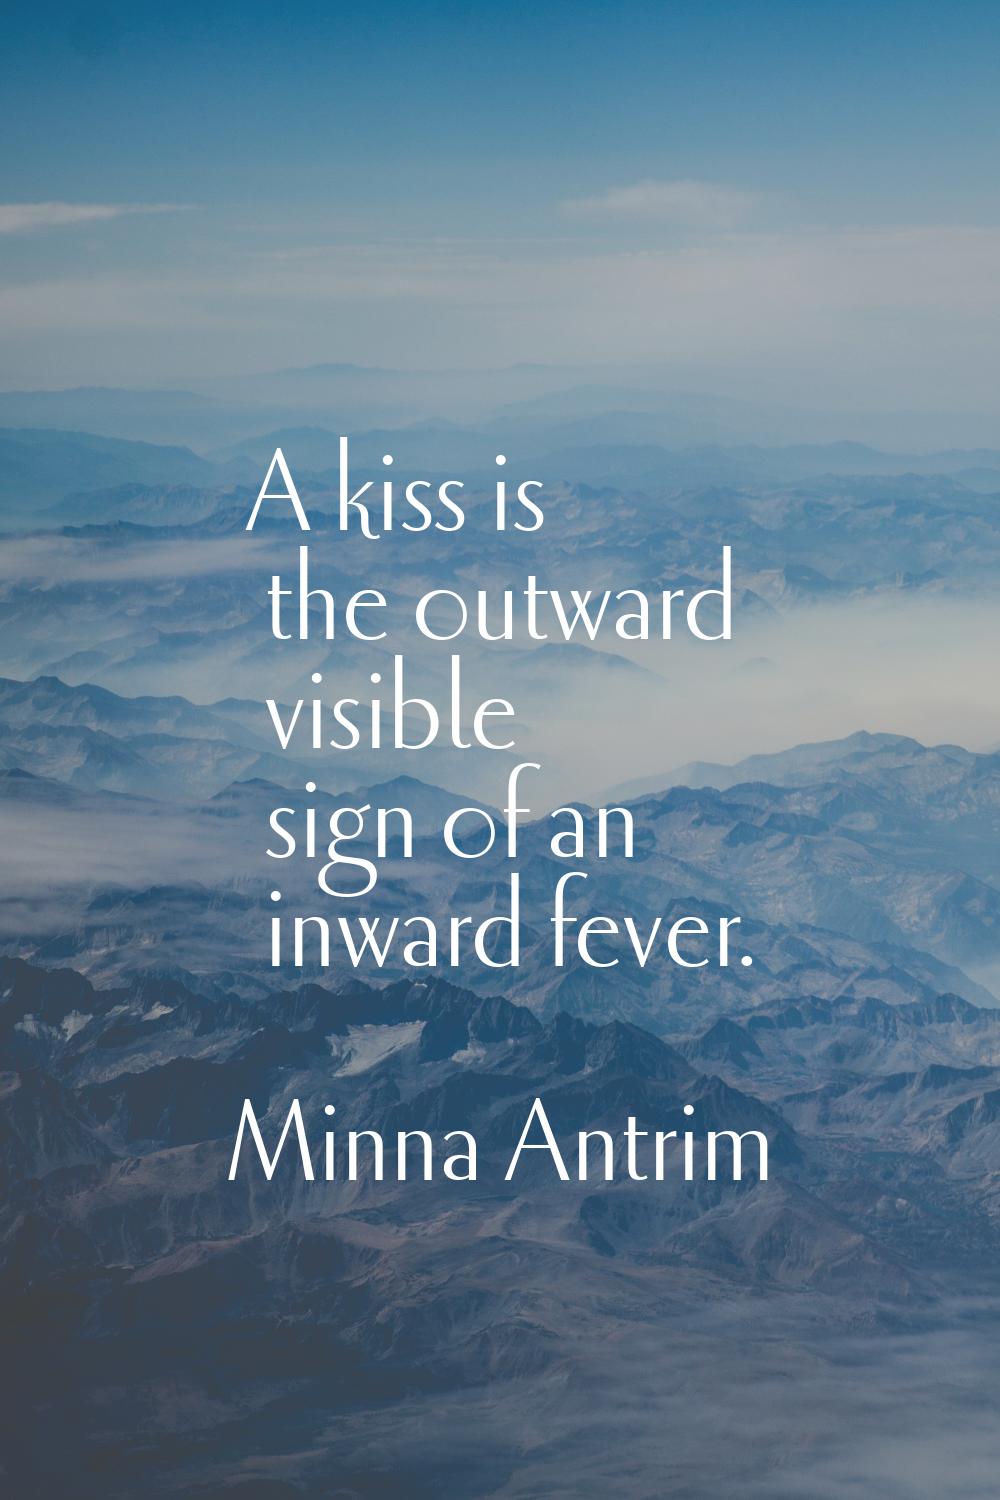 A kiss is the outward visible sign of an inward fever.